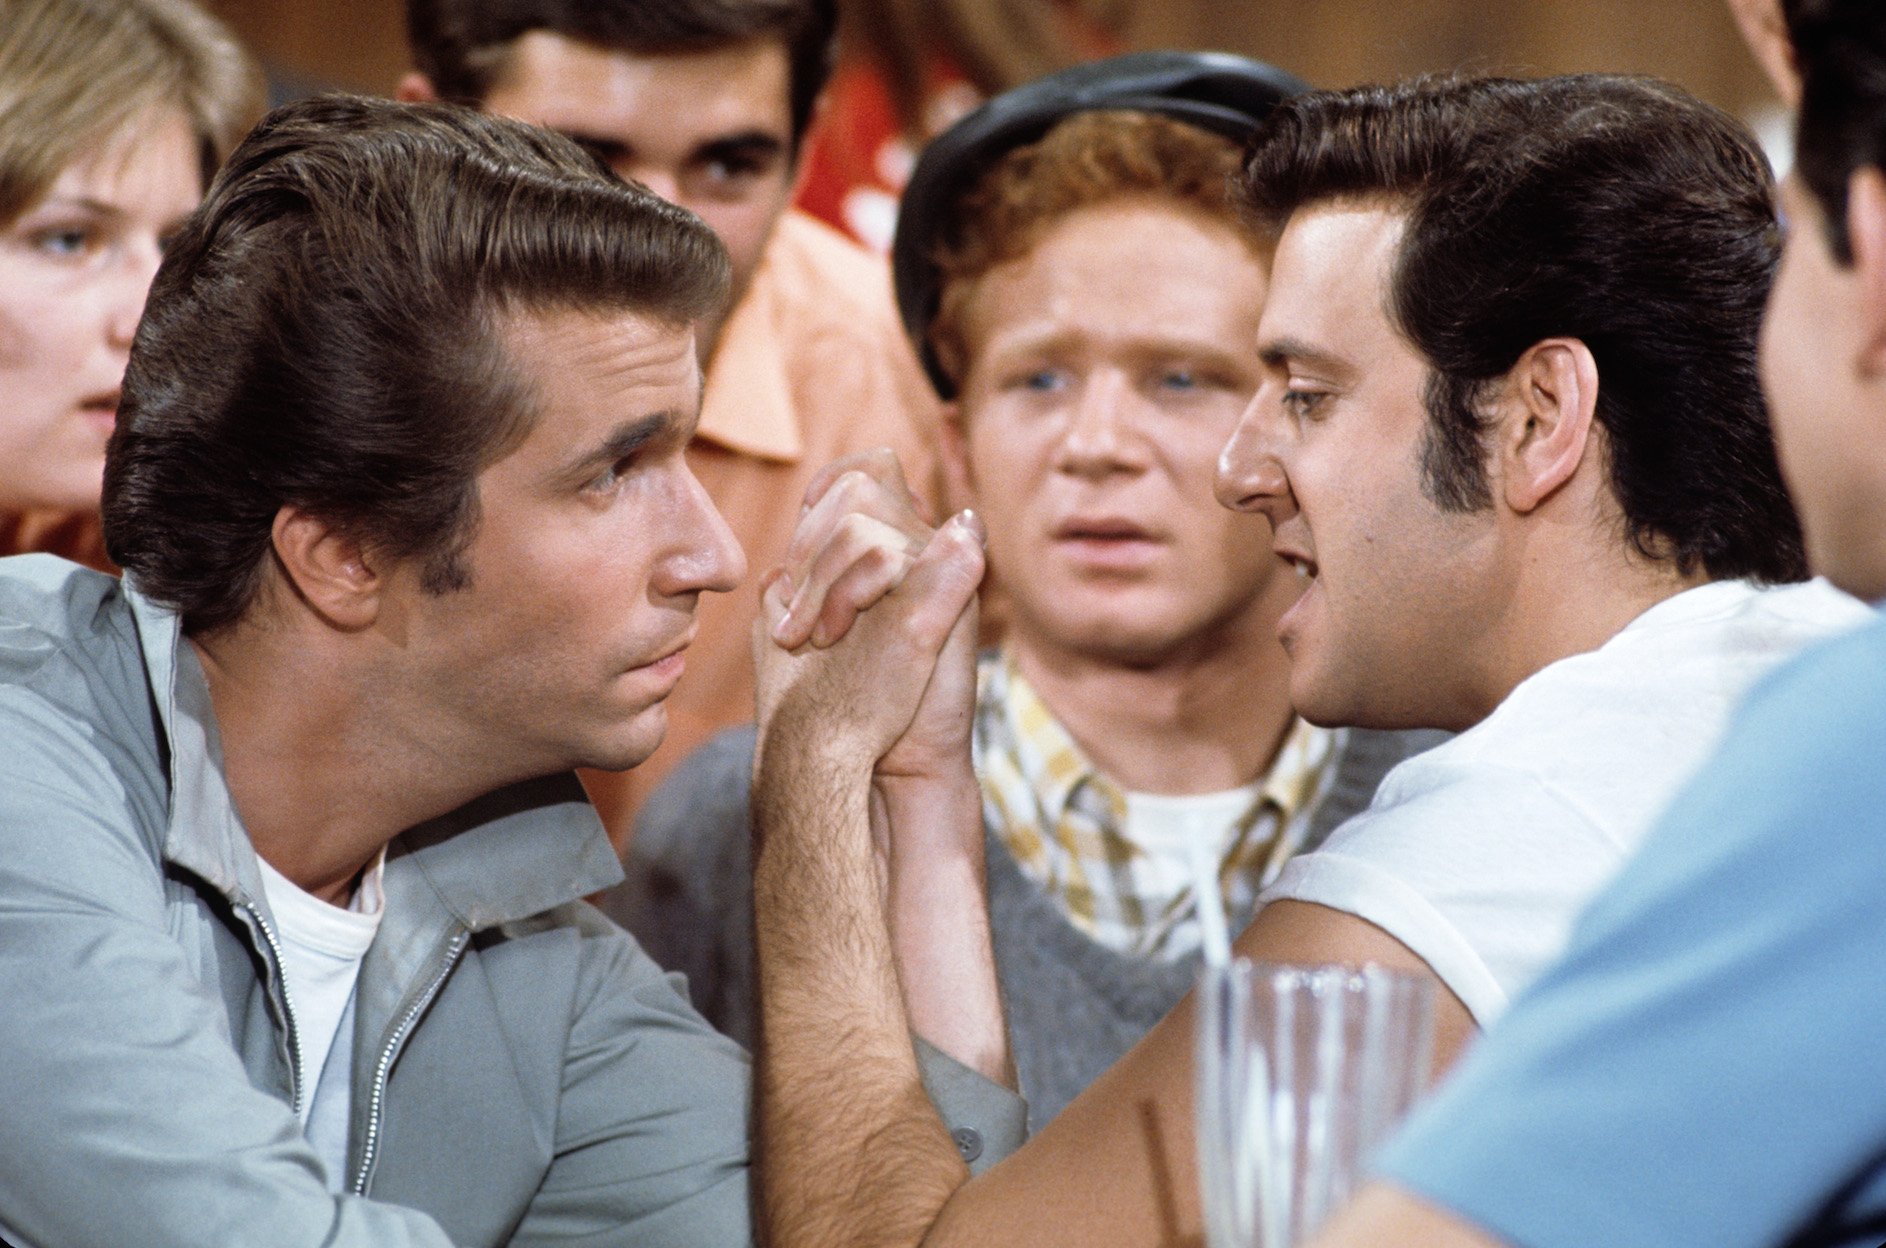 Henry Winkler, Donny Most, and Alan Abelew on 'Happy Days'